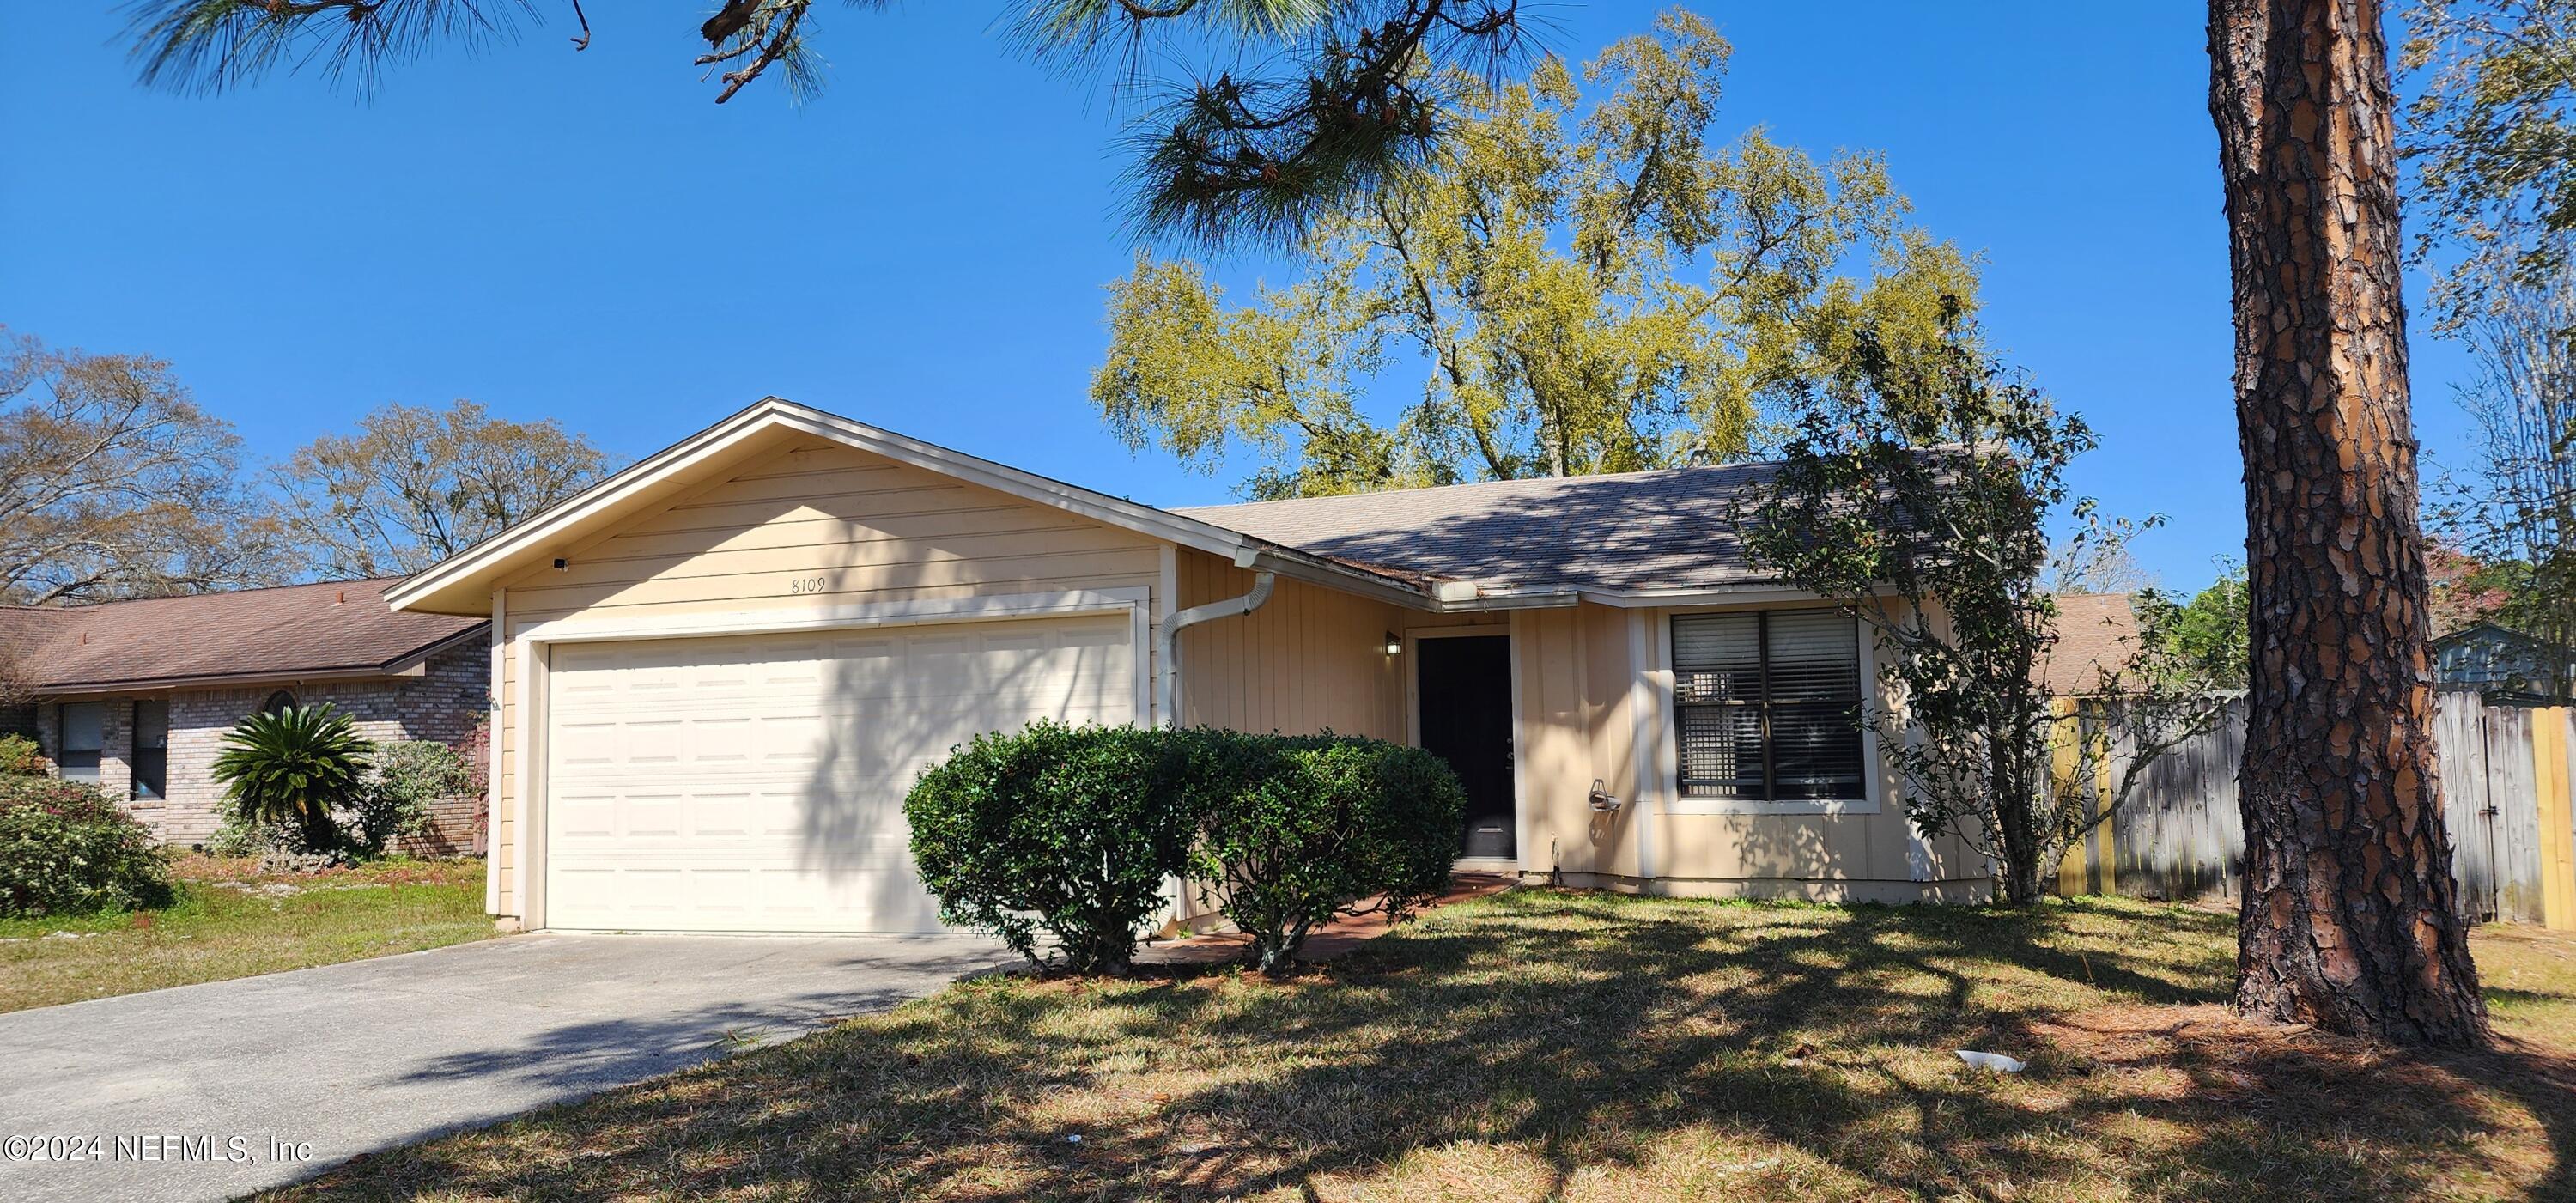 Jacksonville, FL home for sale located at 8109 GREAT VALLEY Trail, Jacksonville, FL 32244